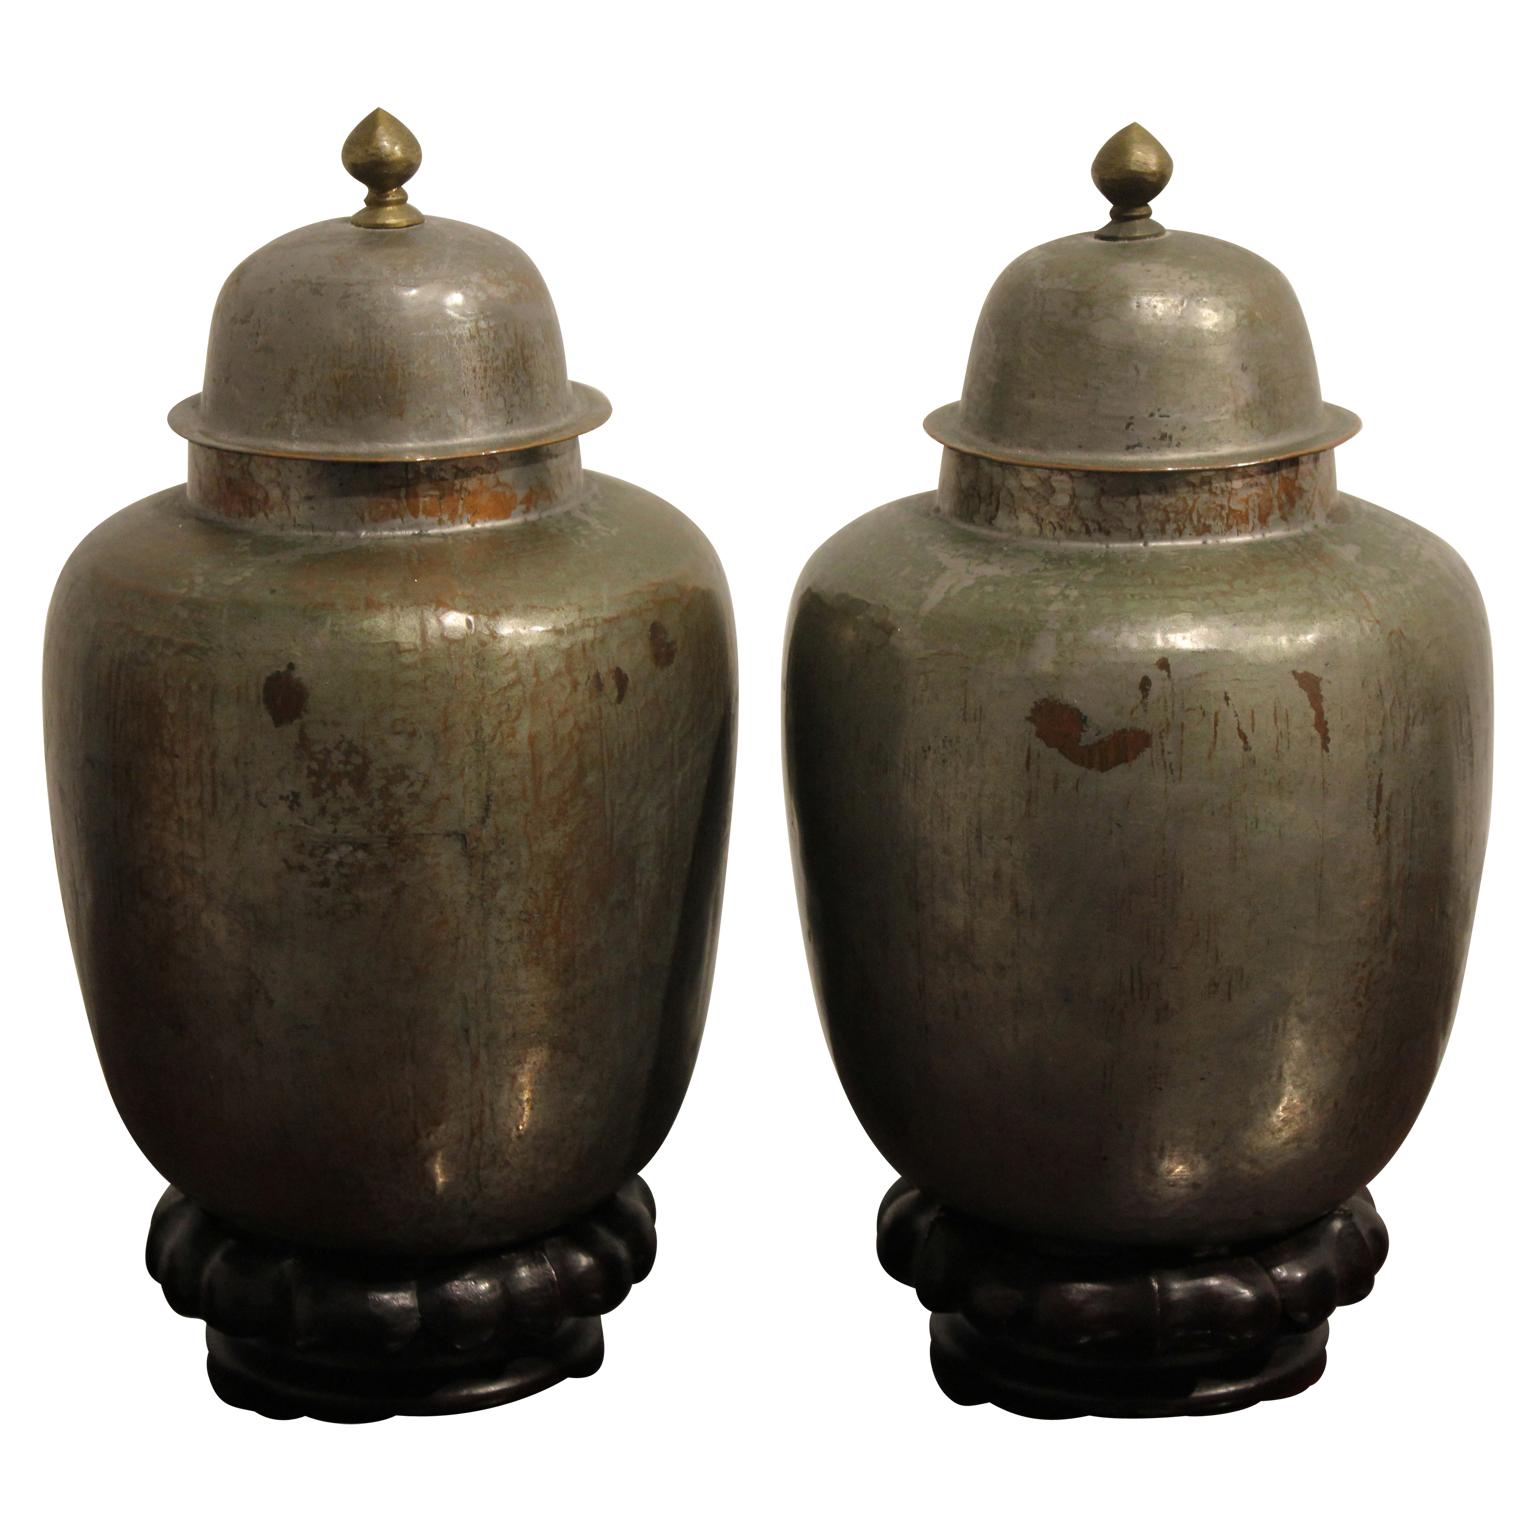 Gilt copper over tin urn-shaped vessels that sit on a decoratively carved wooden pedestal. The vessels are sold as a pair and have detachable lids.
Dimensions are of one urn with the pedestal.
 